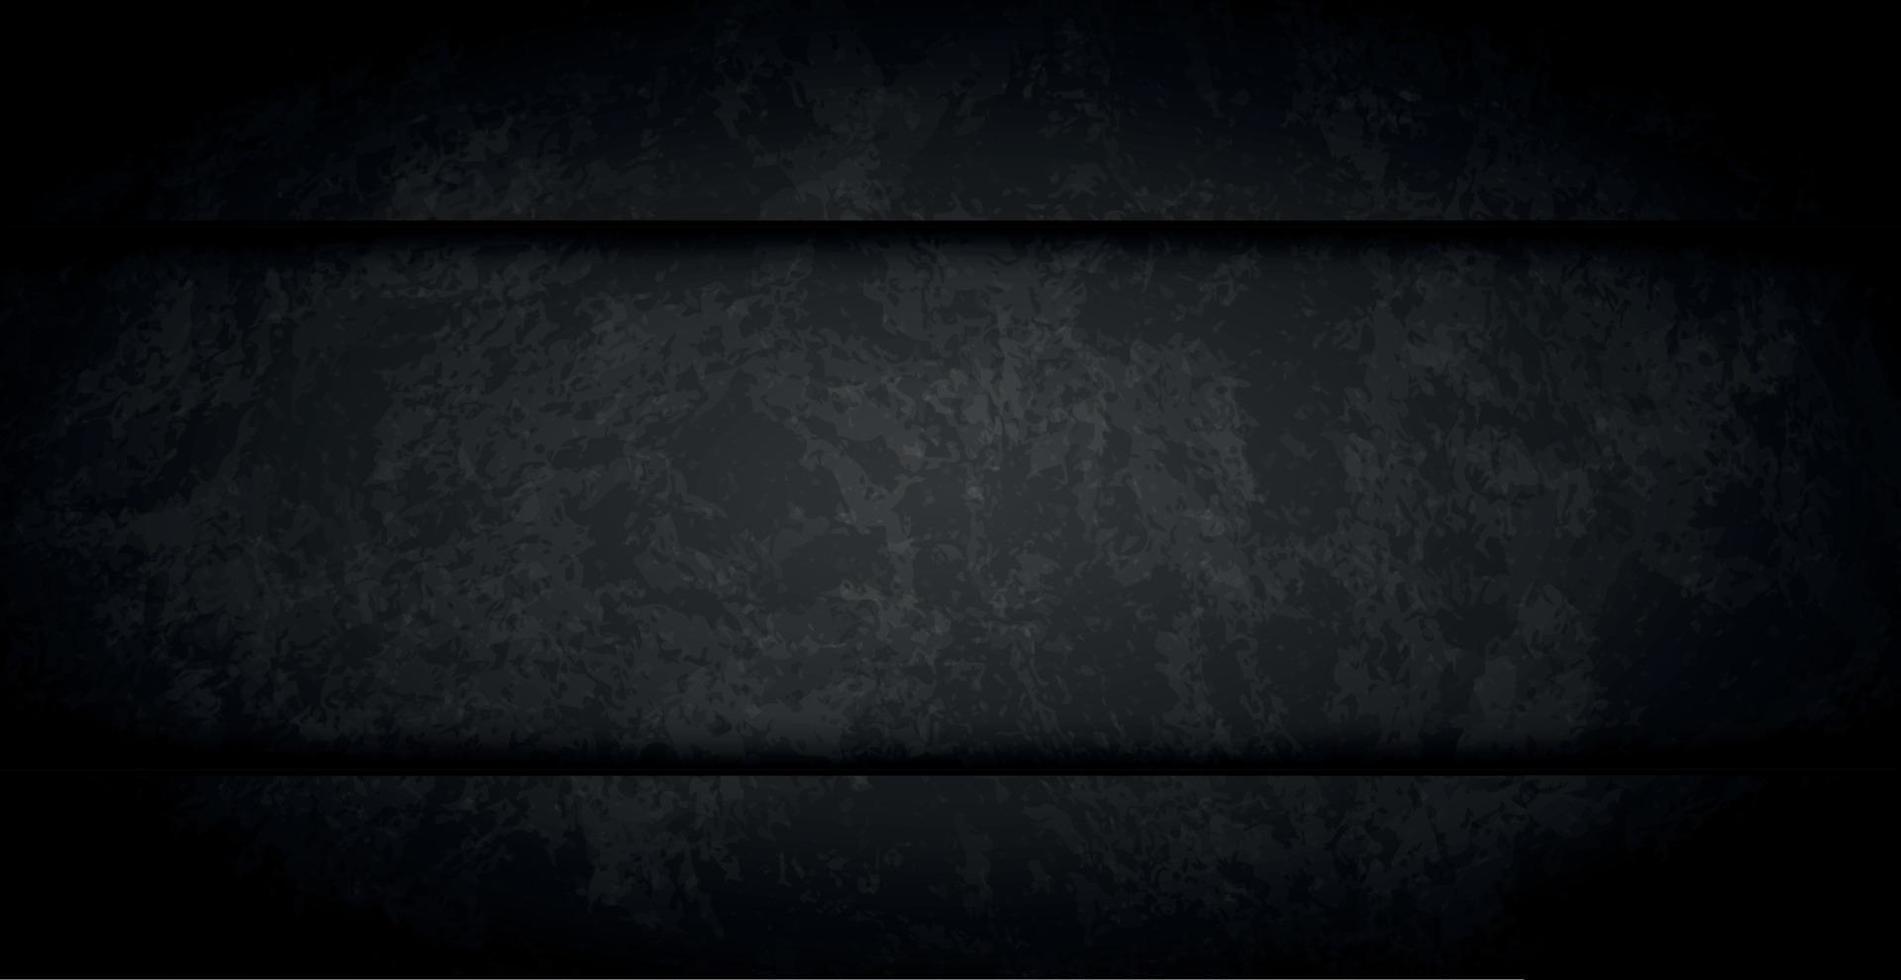 Black abstract textured grunge background wall with horizontal stripes - Vector